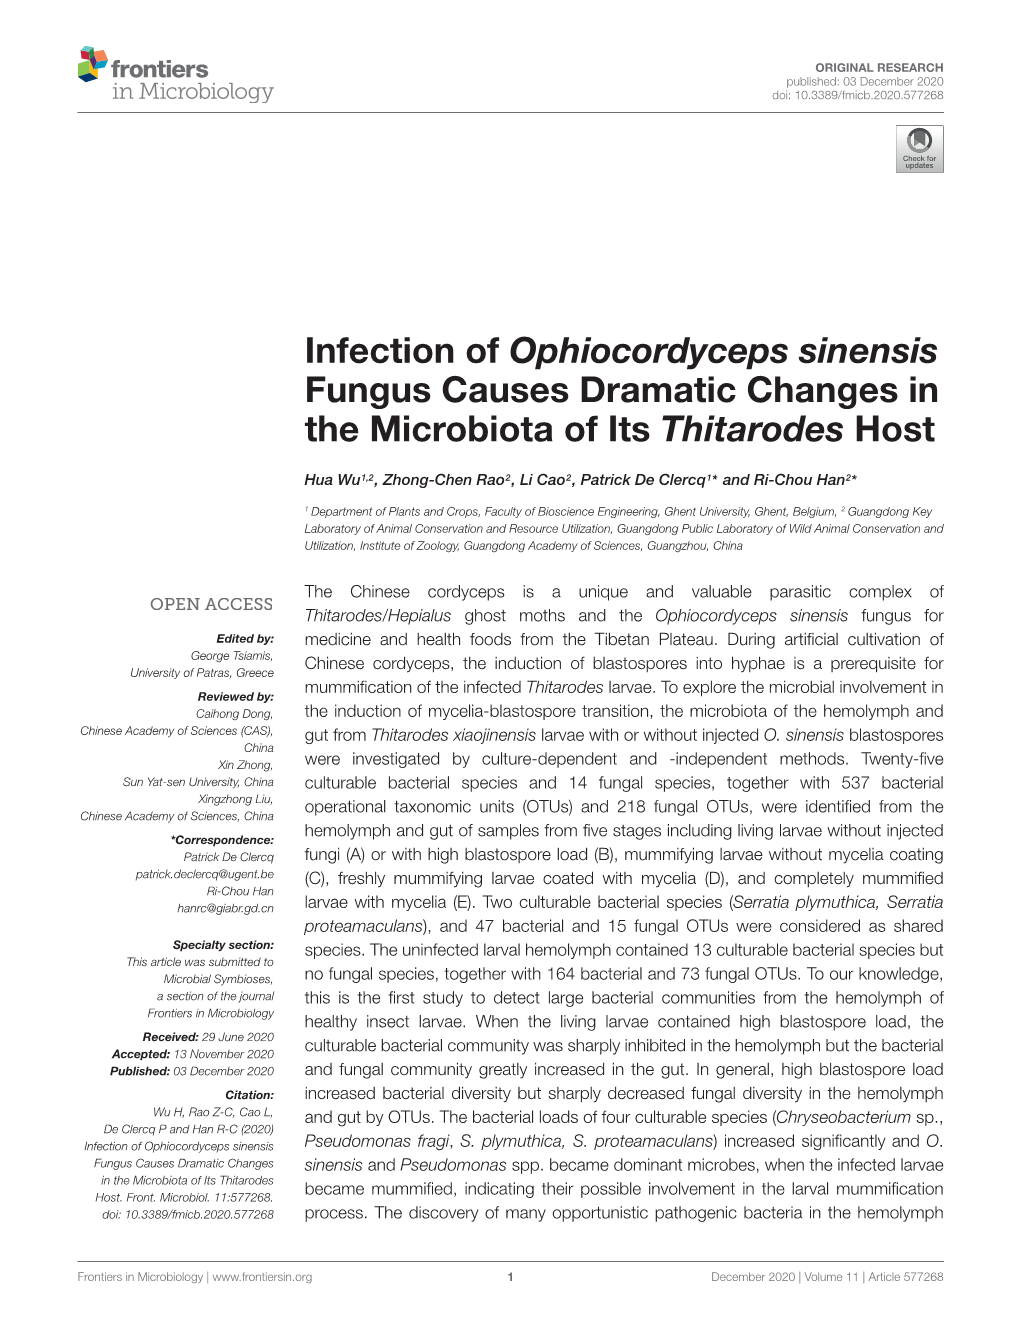 Infection of Ophiocordyceps Sinensis Fungus Causes Dramatic Changes in the Microbiota of Its Thitarodes Host